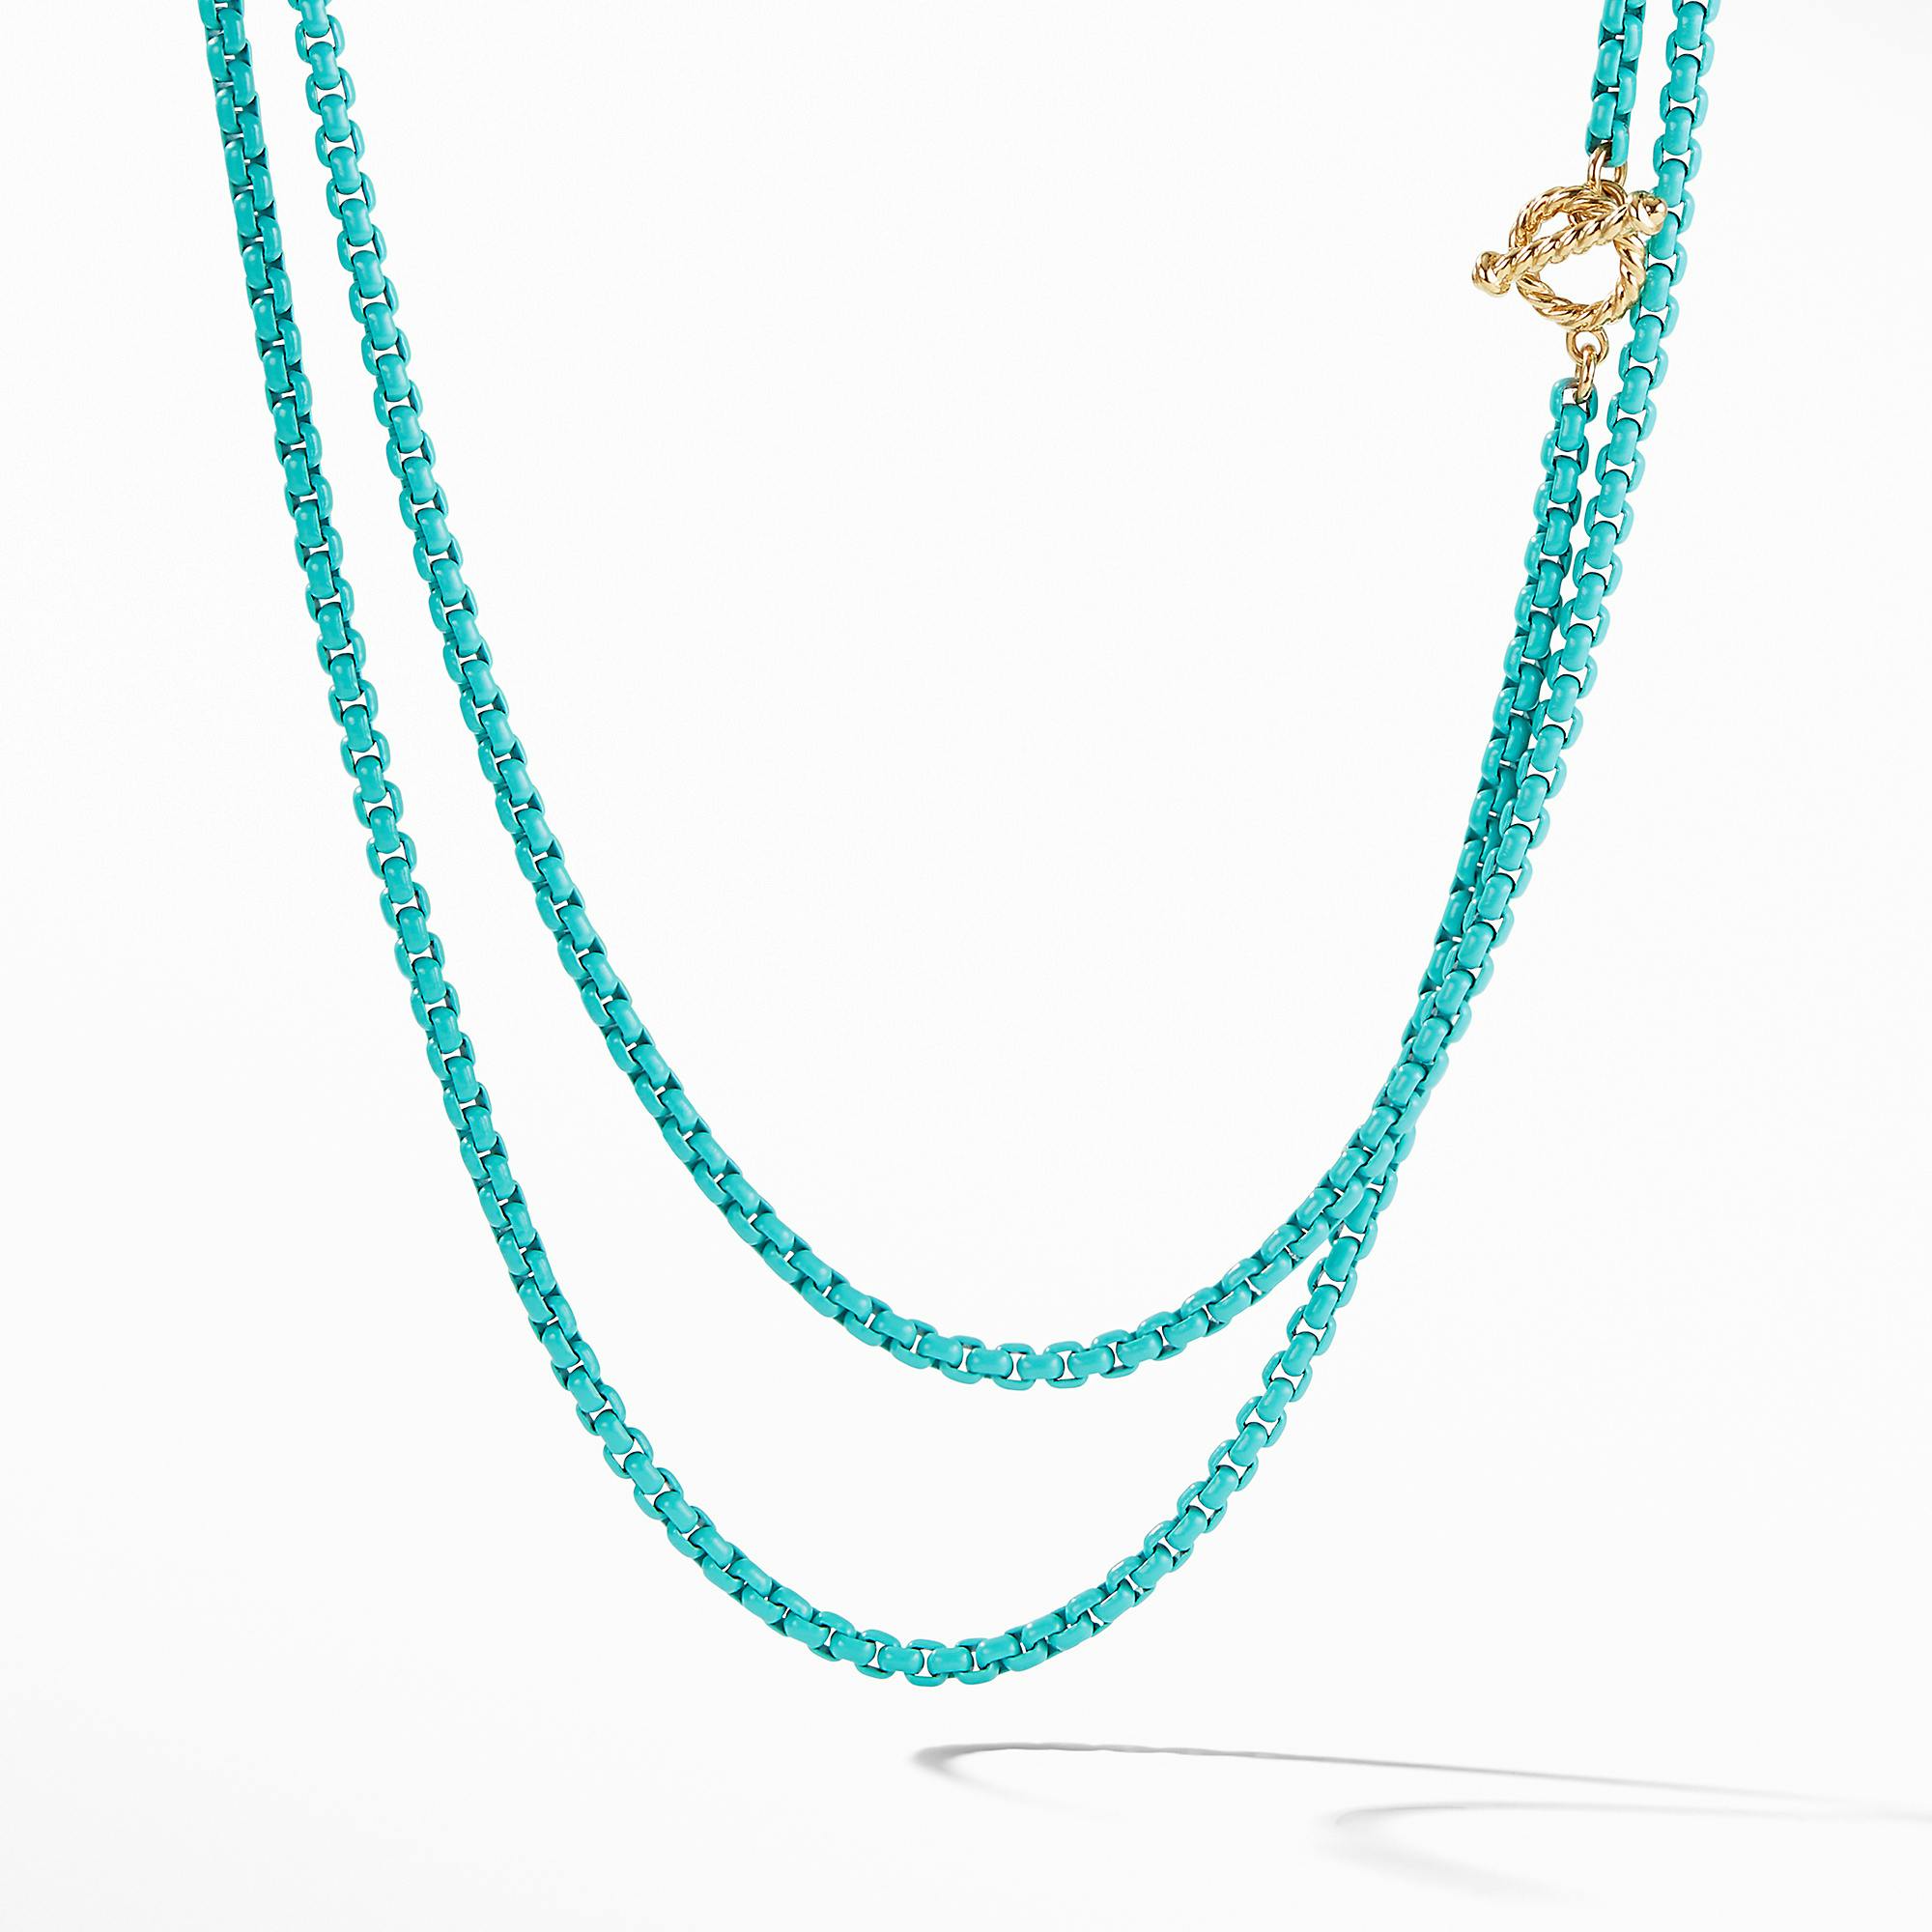 David Yurman Bel Aire Chain Necklace in Turquoise